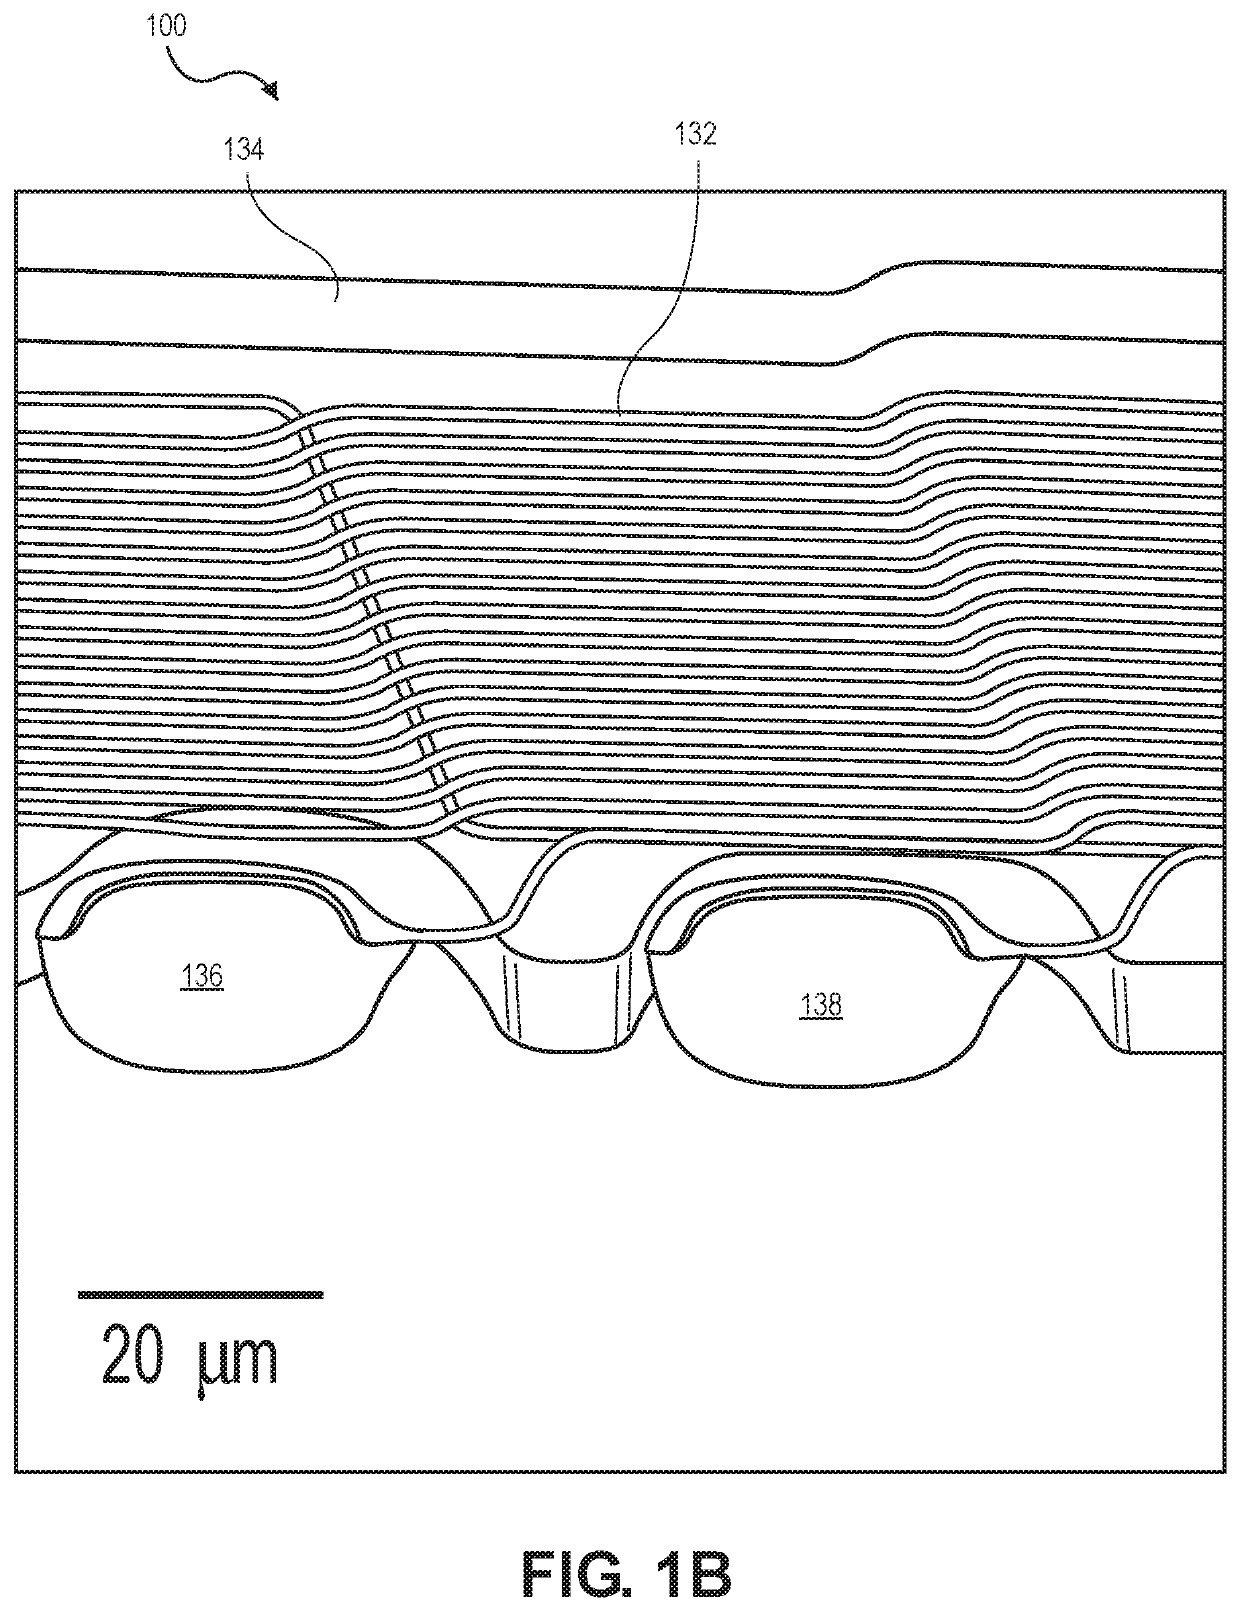 Electrode fabrication and design